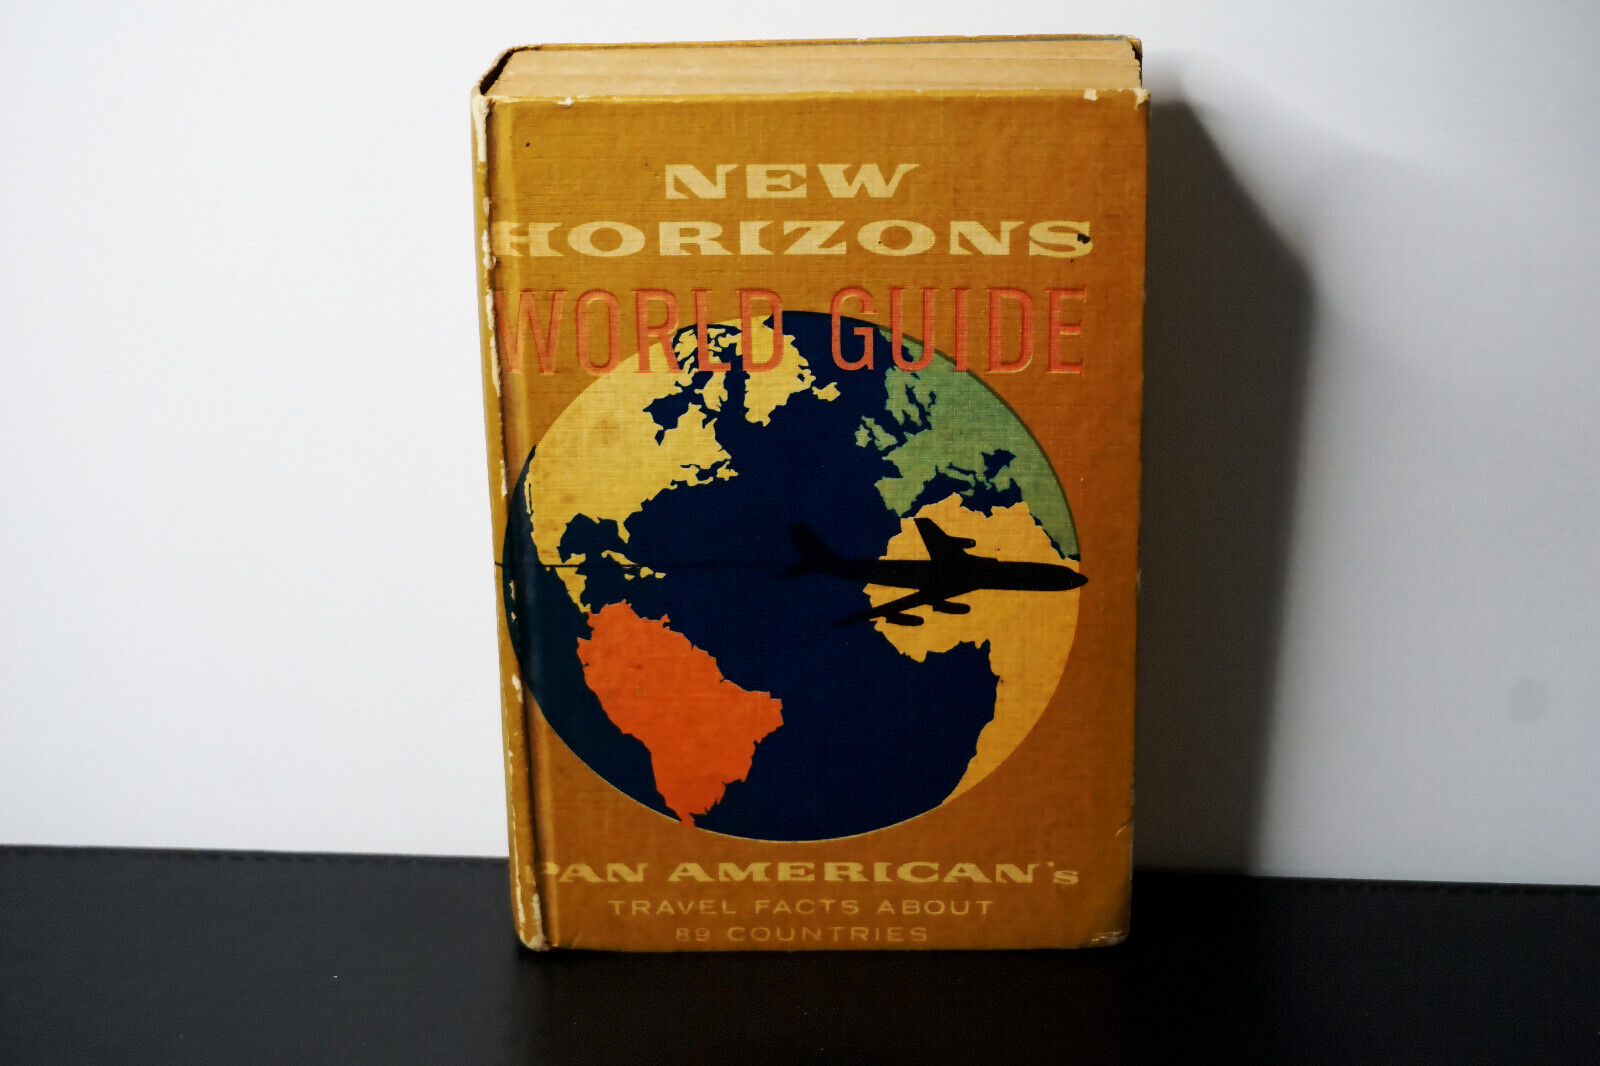 New Horizons World Guide 1959 Pan American\'s World Airlines Travel Facts -Gold